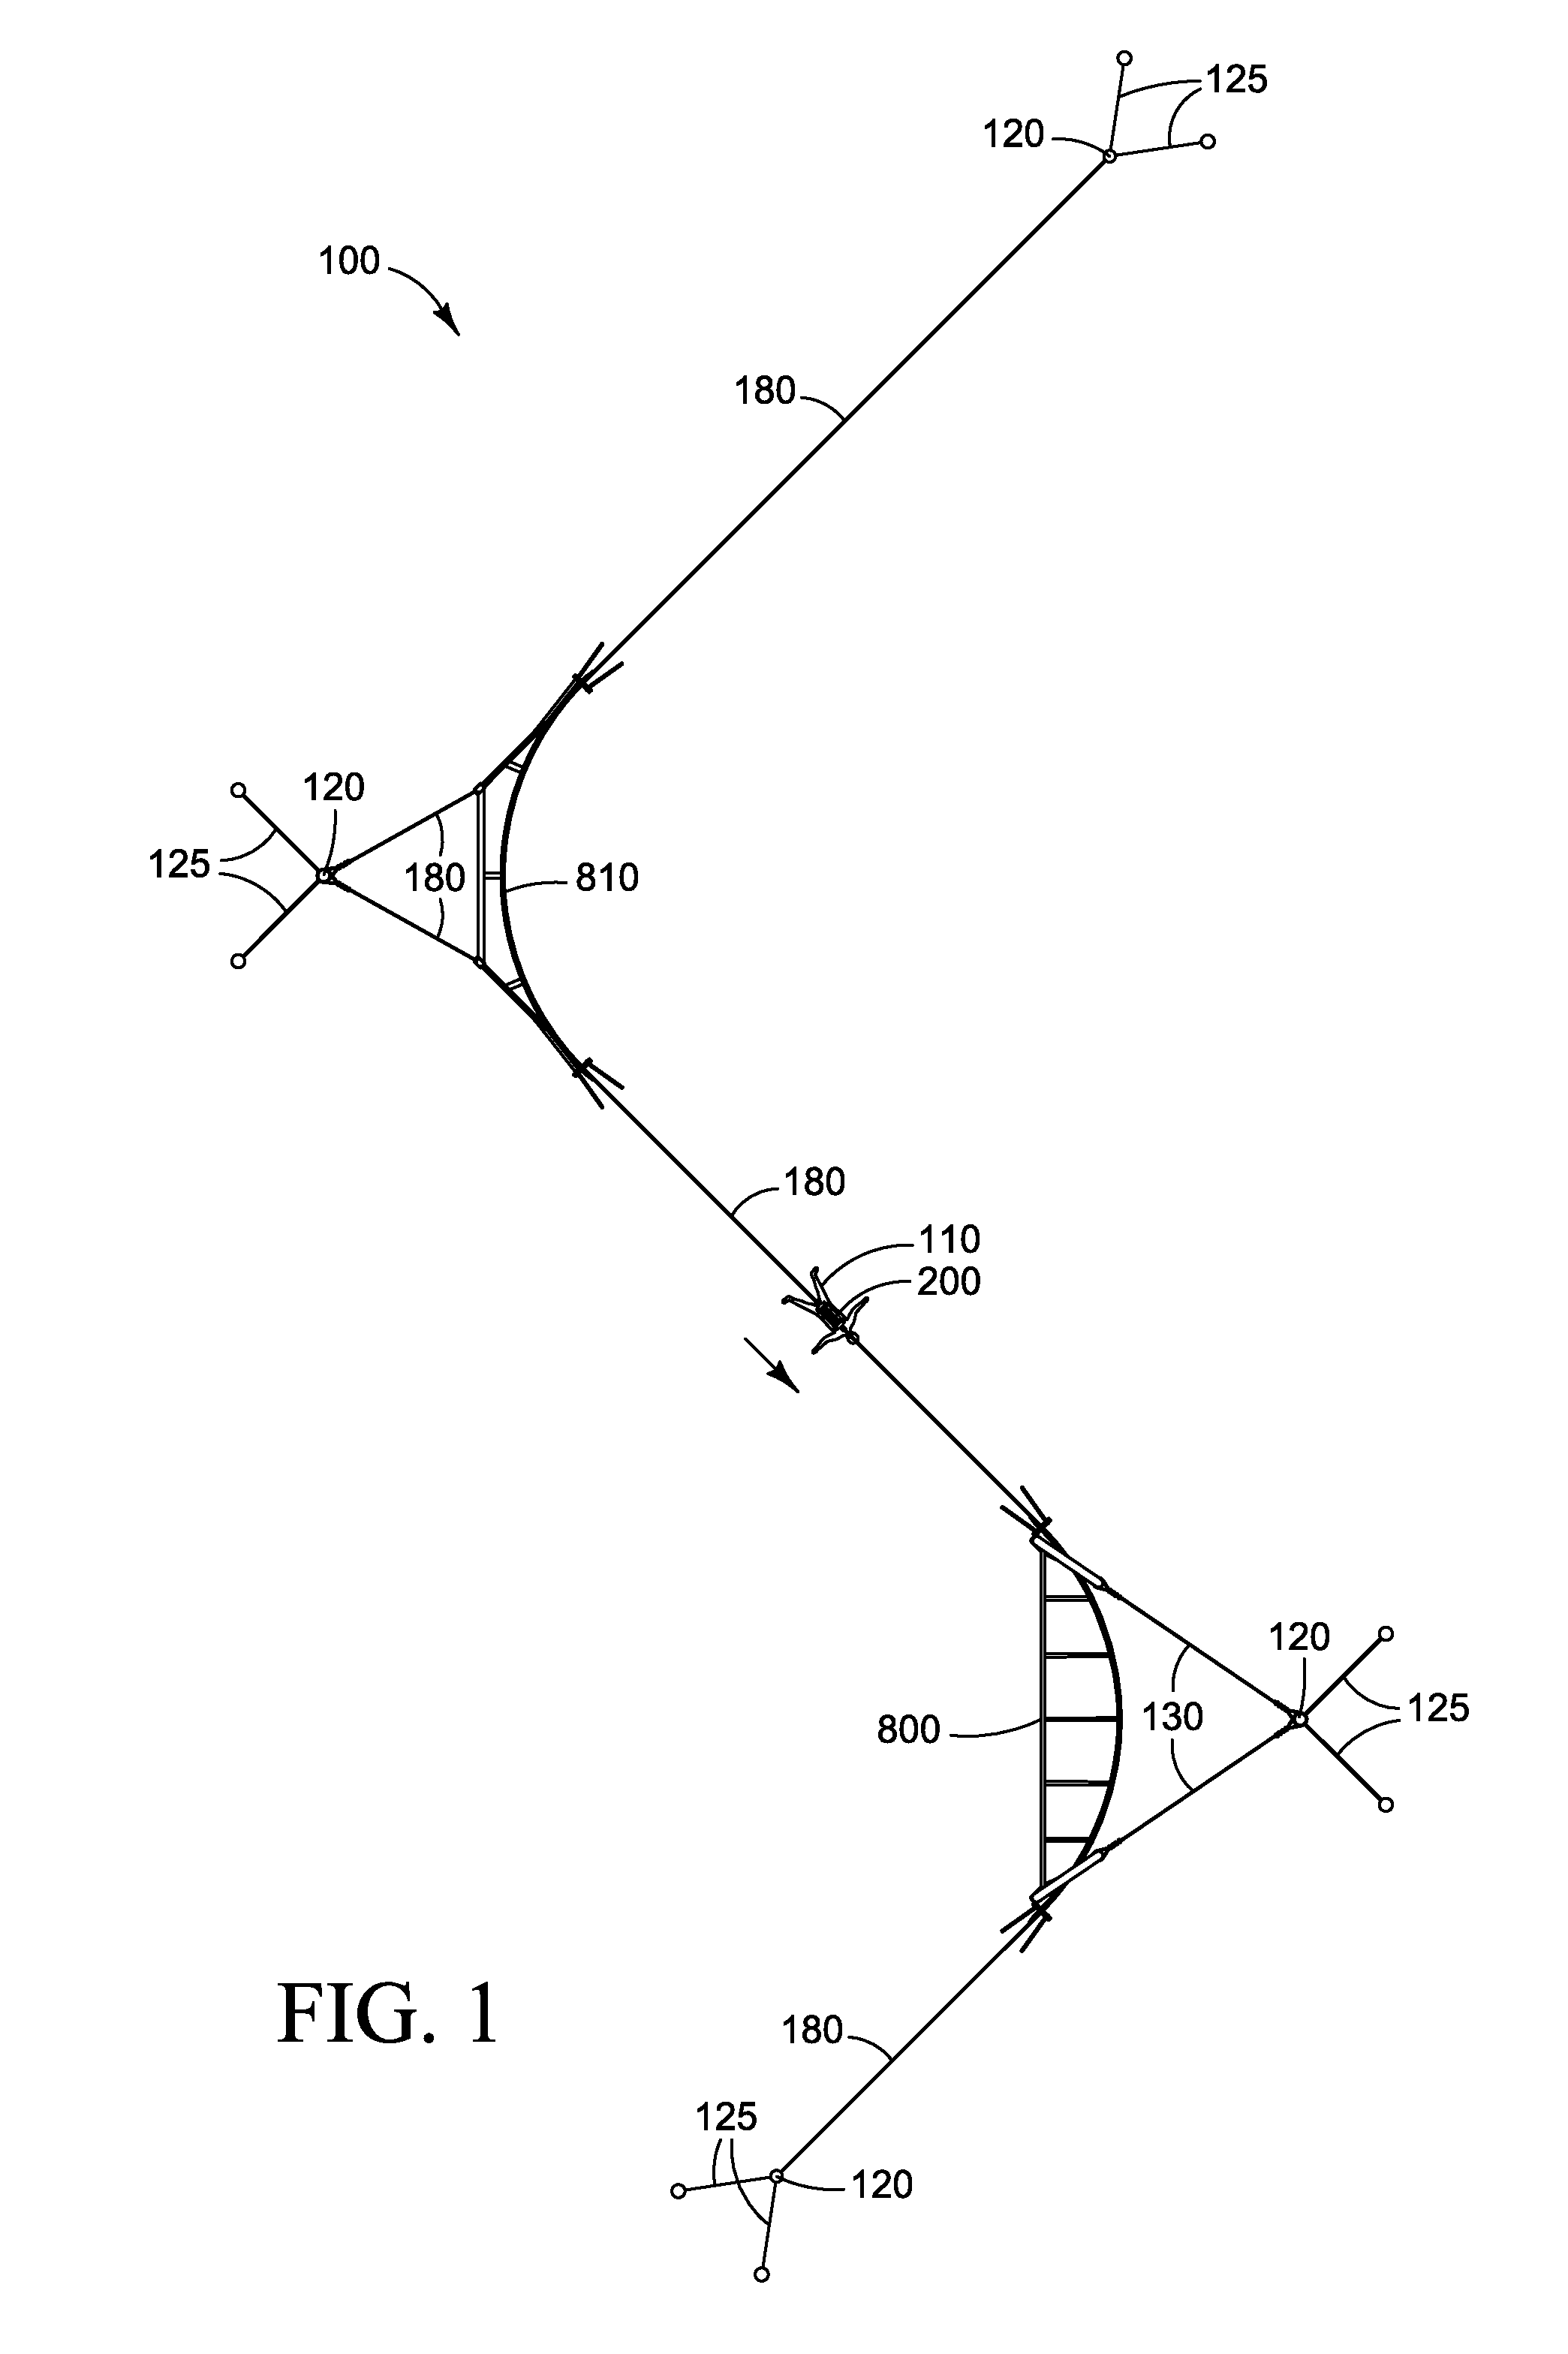 Cable transport system